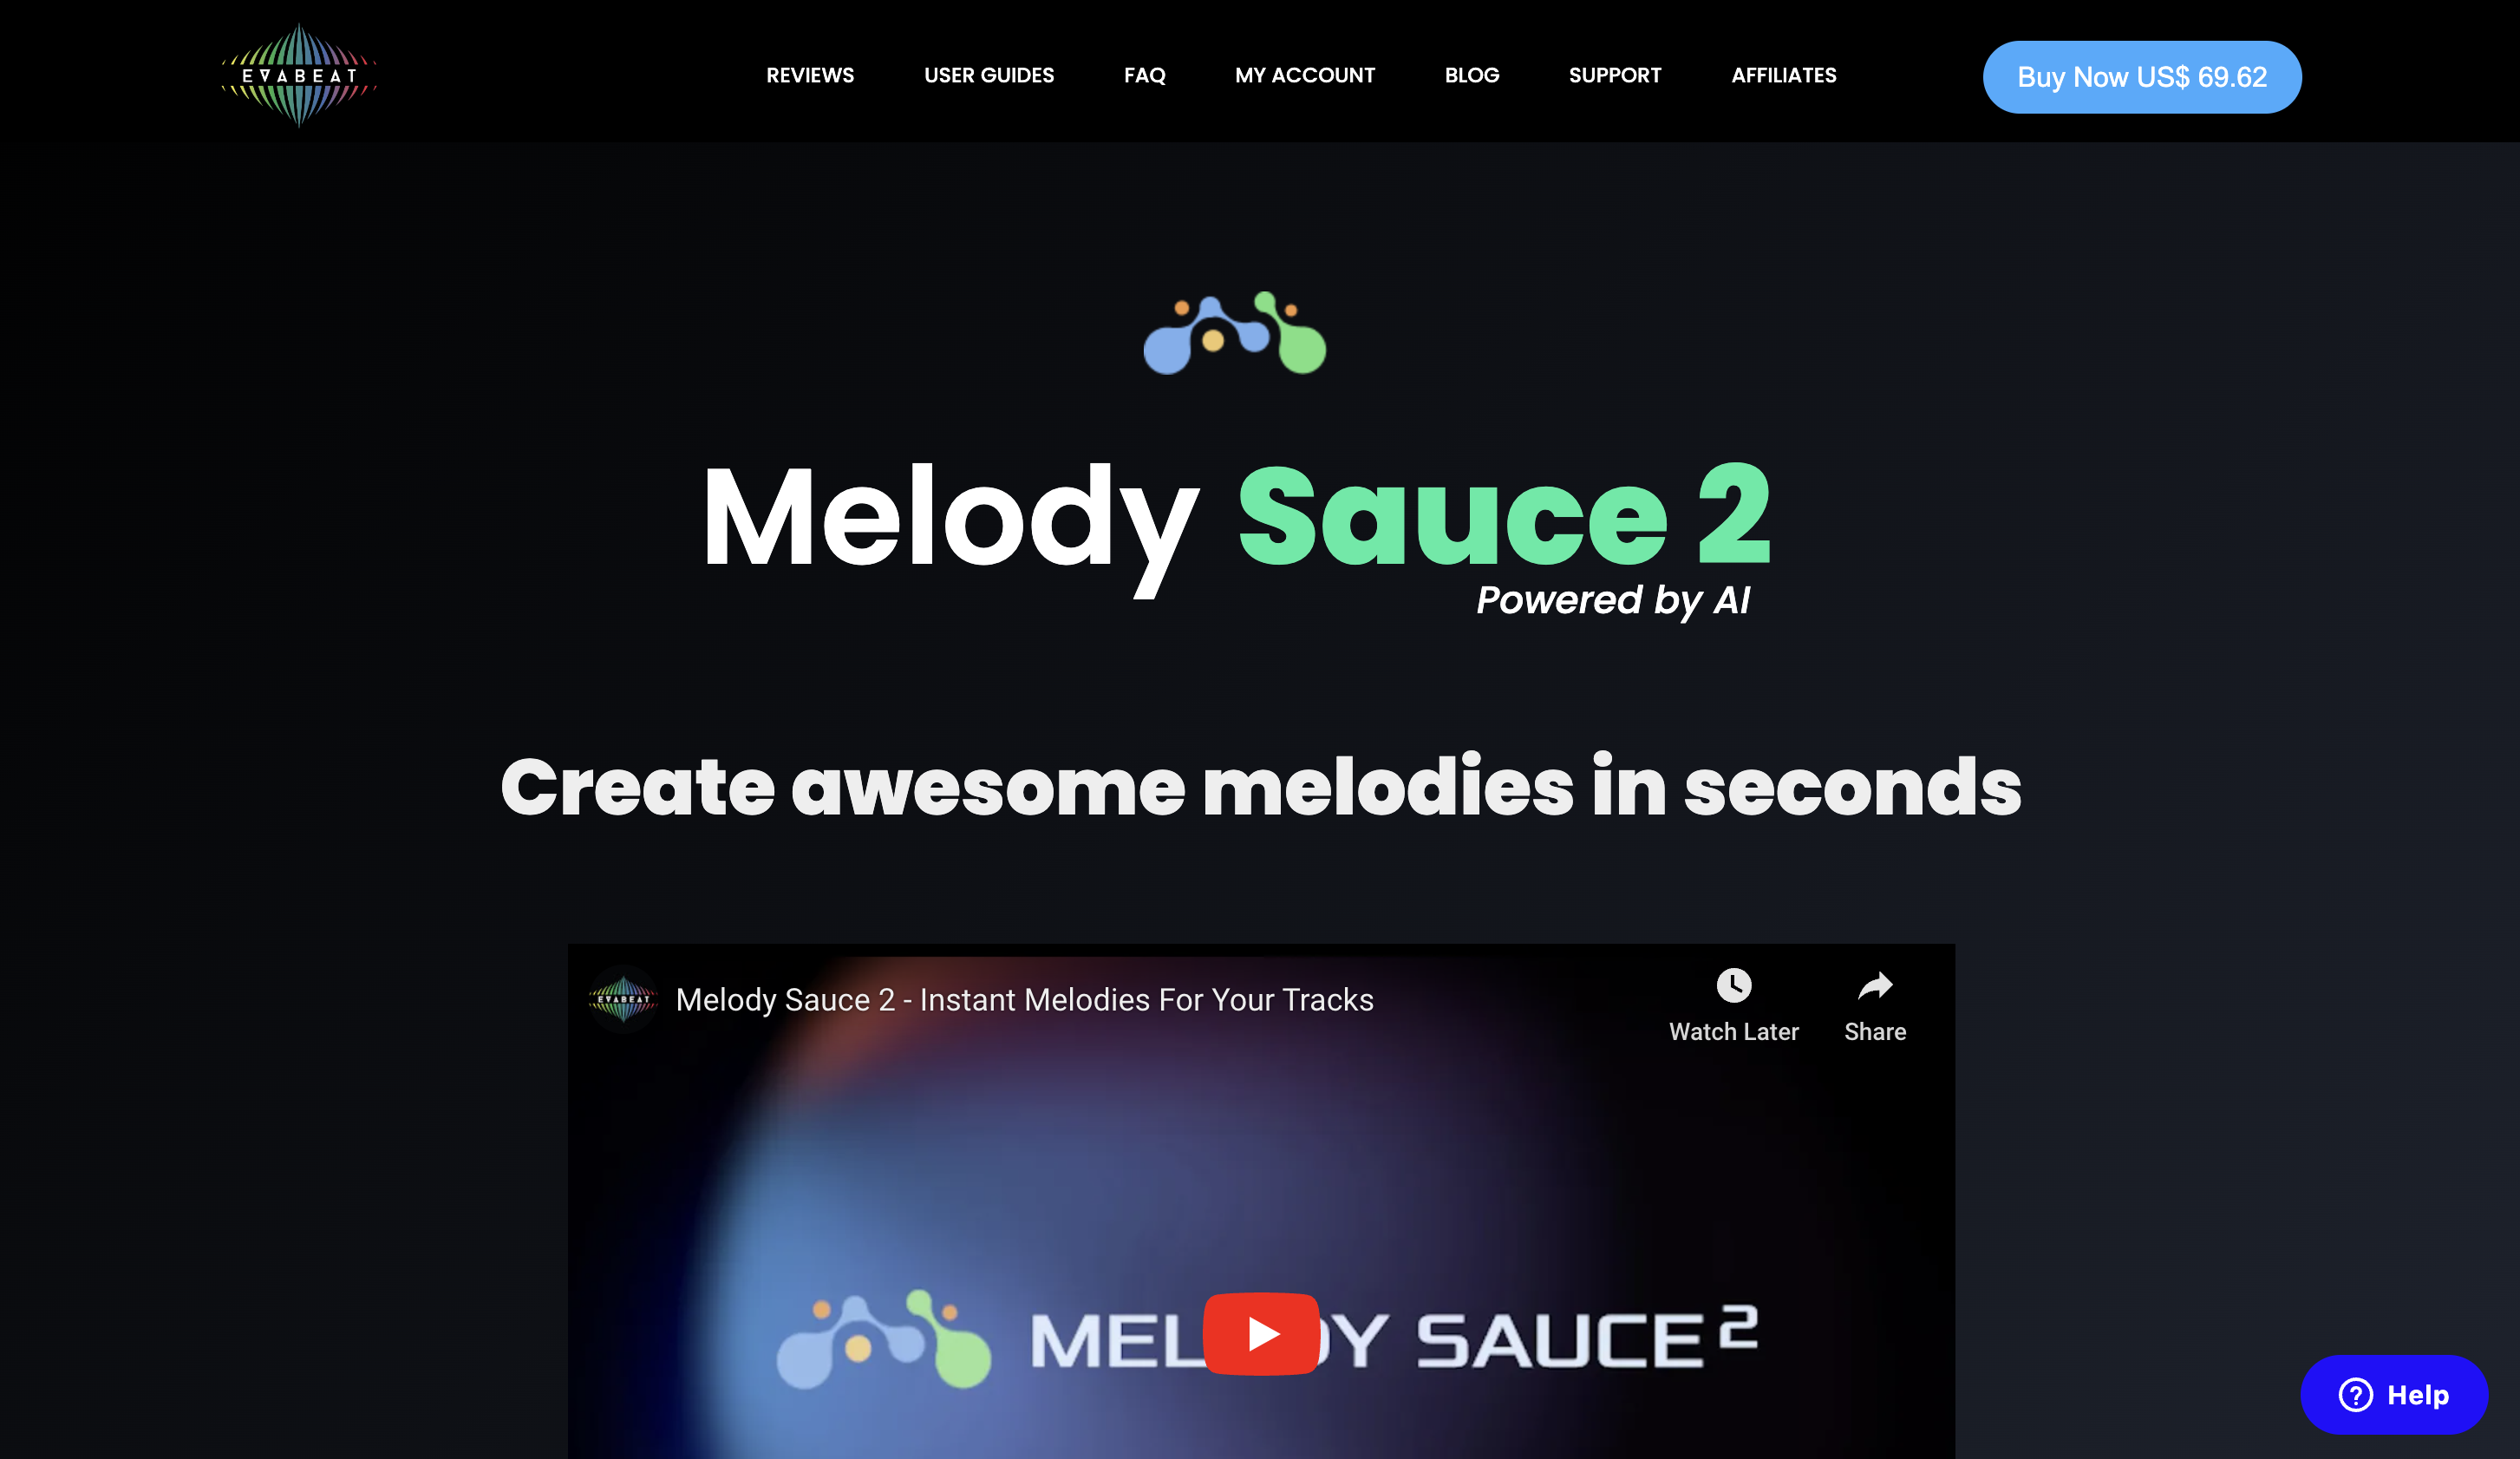 Melody Sauce